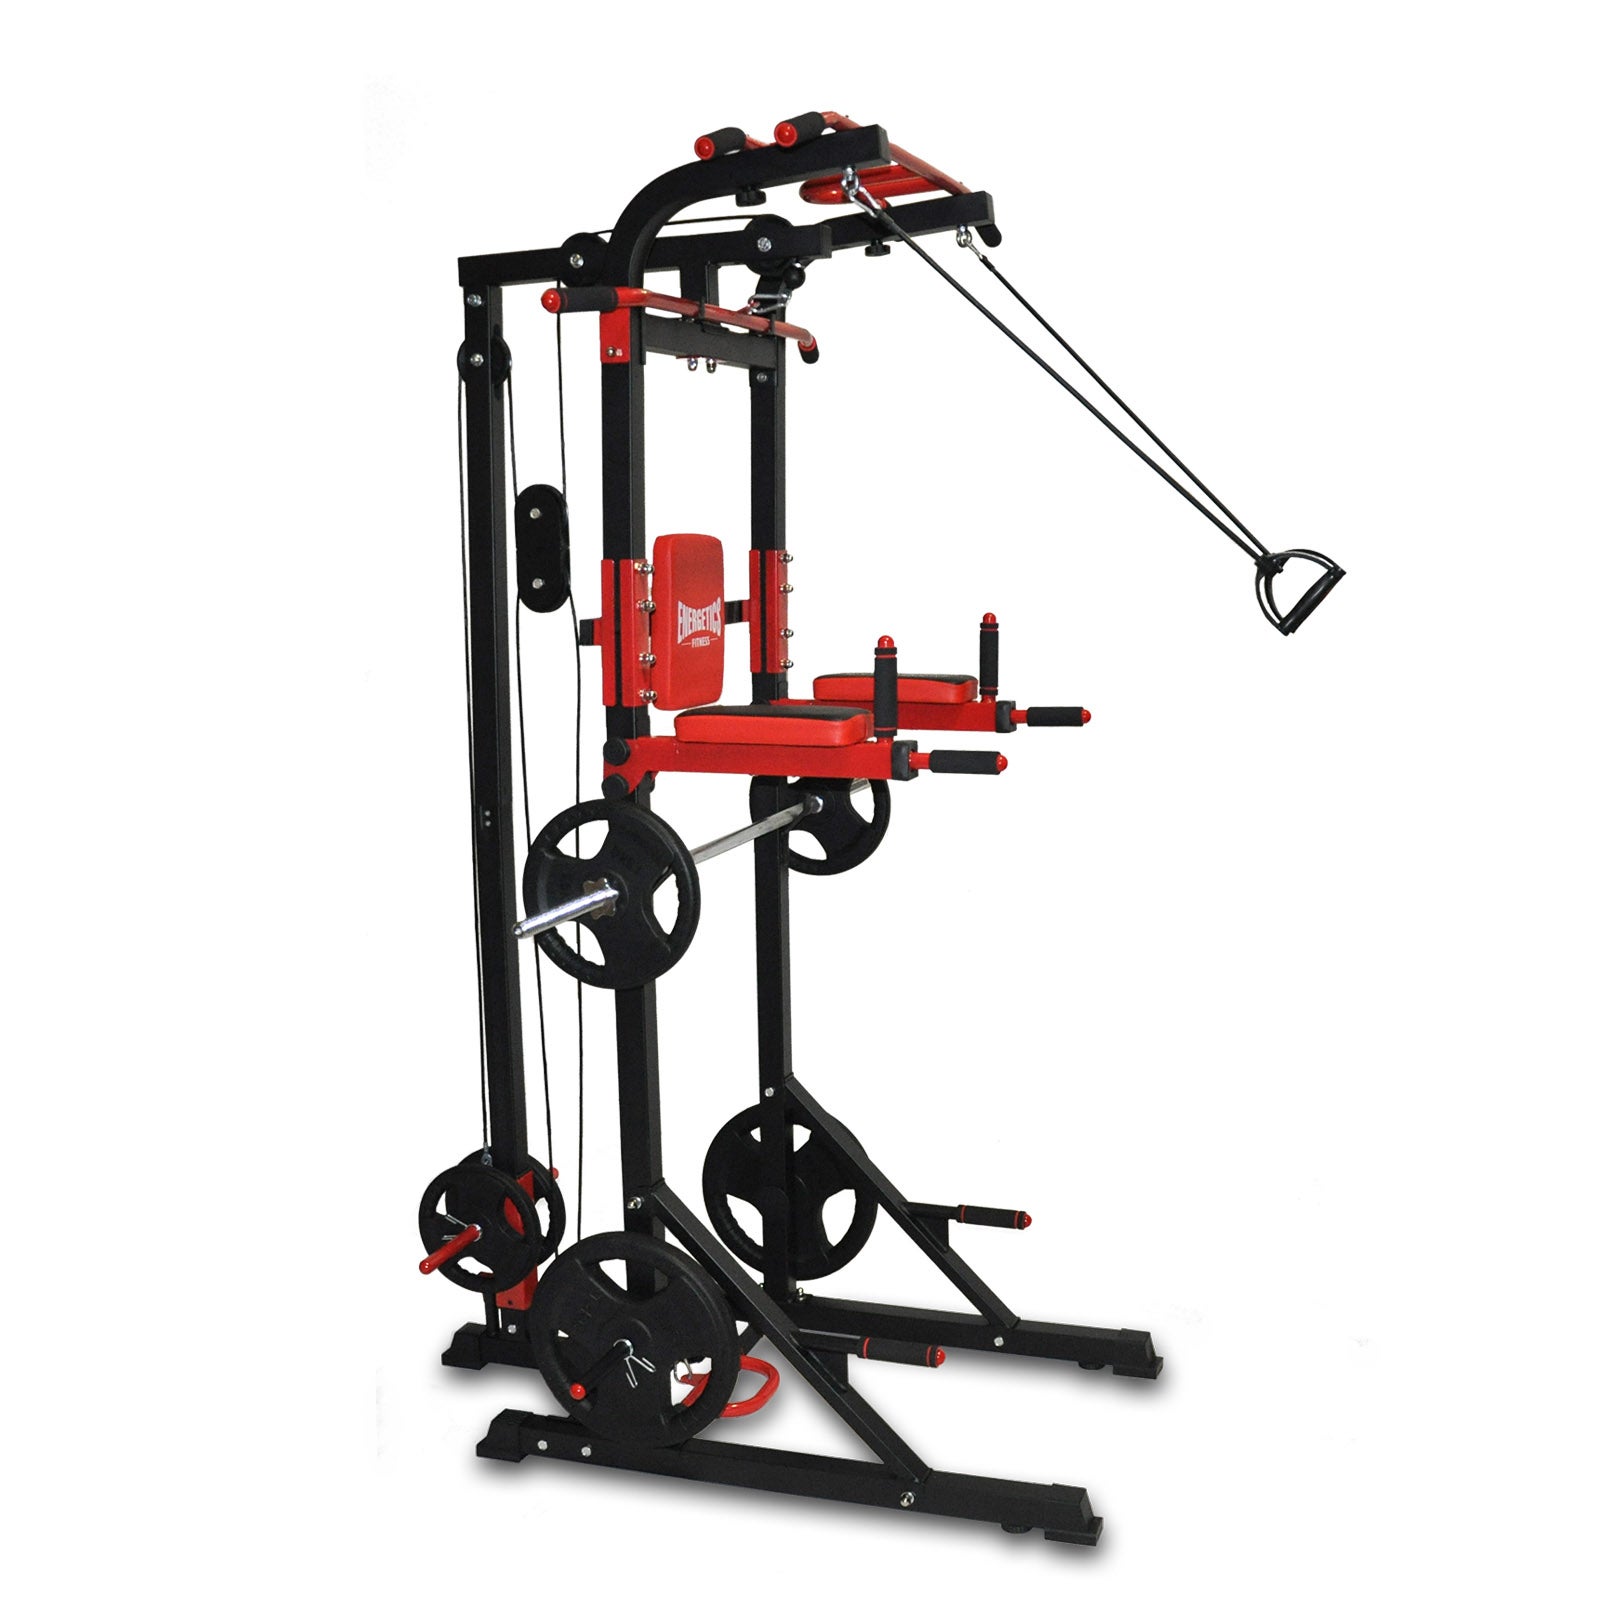 Power Tower - Power Rack - Lat Pulldown / Row Pulley / Chin Up Station / Dips